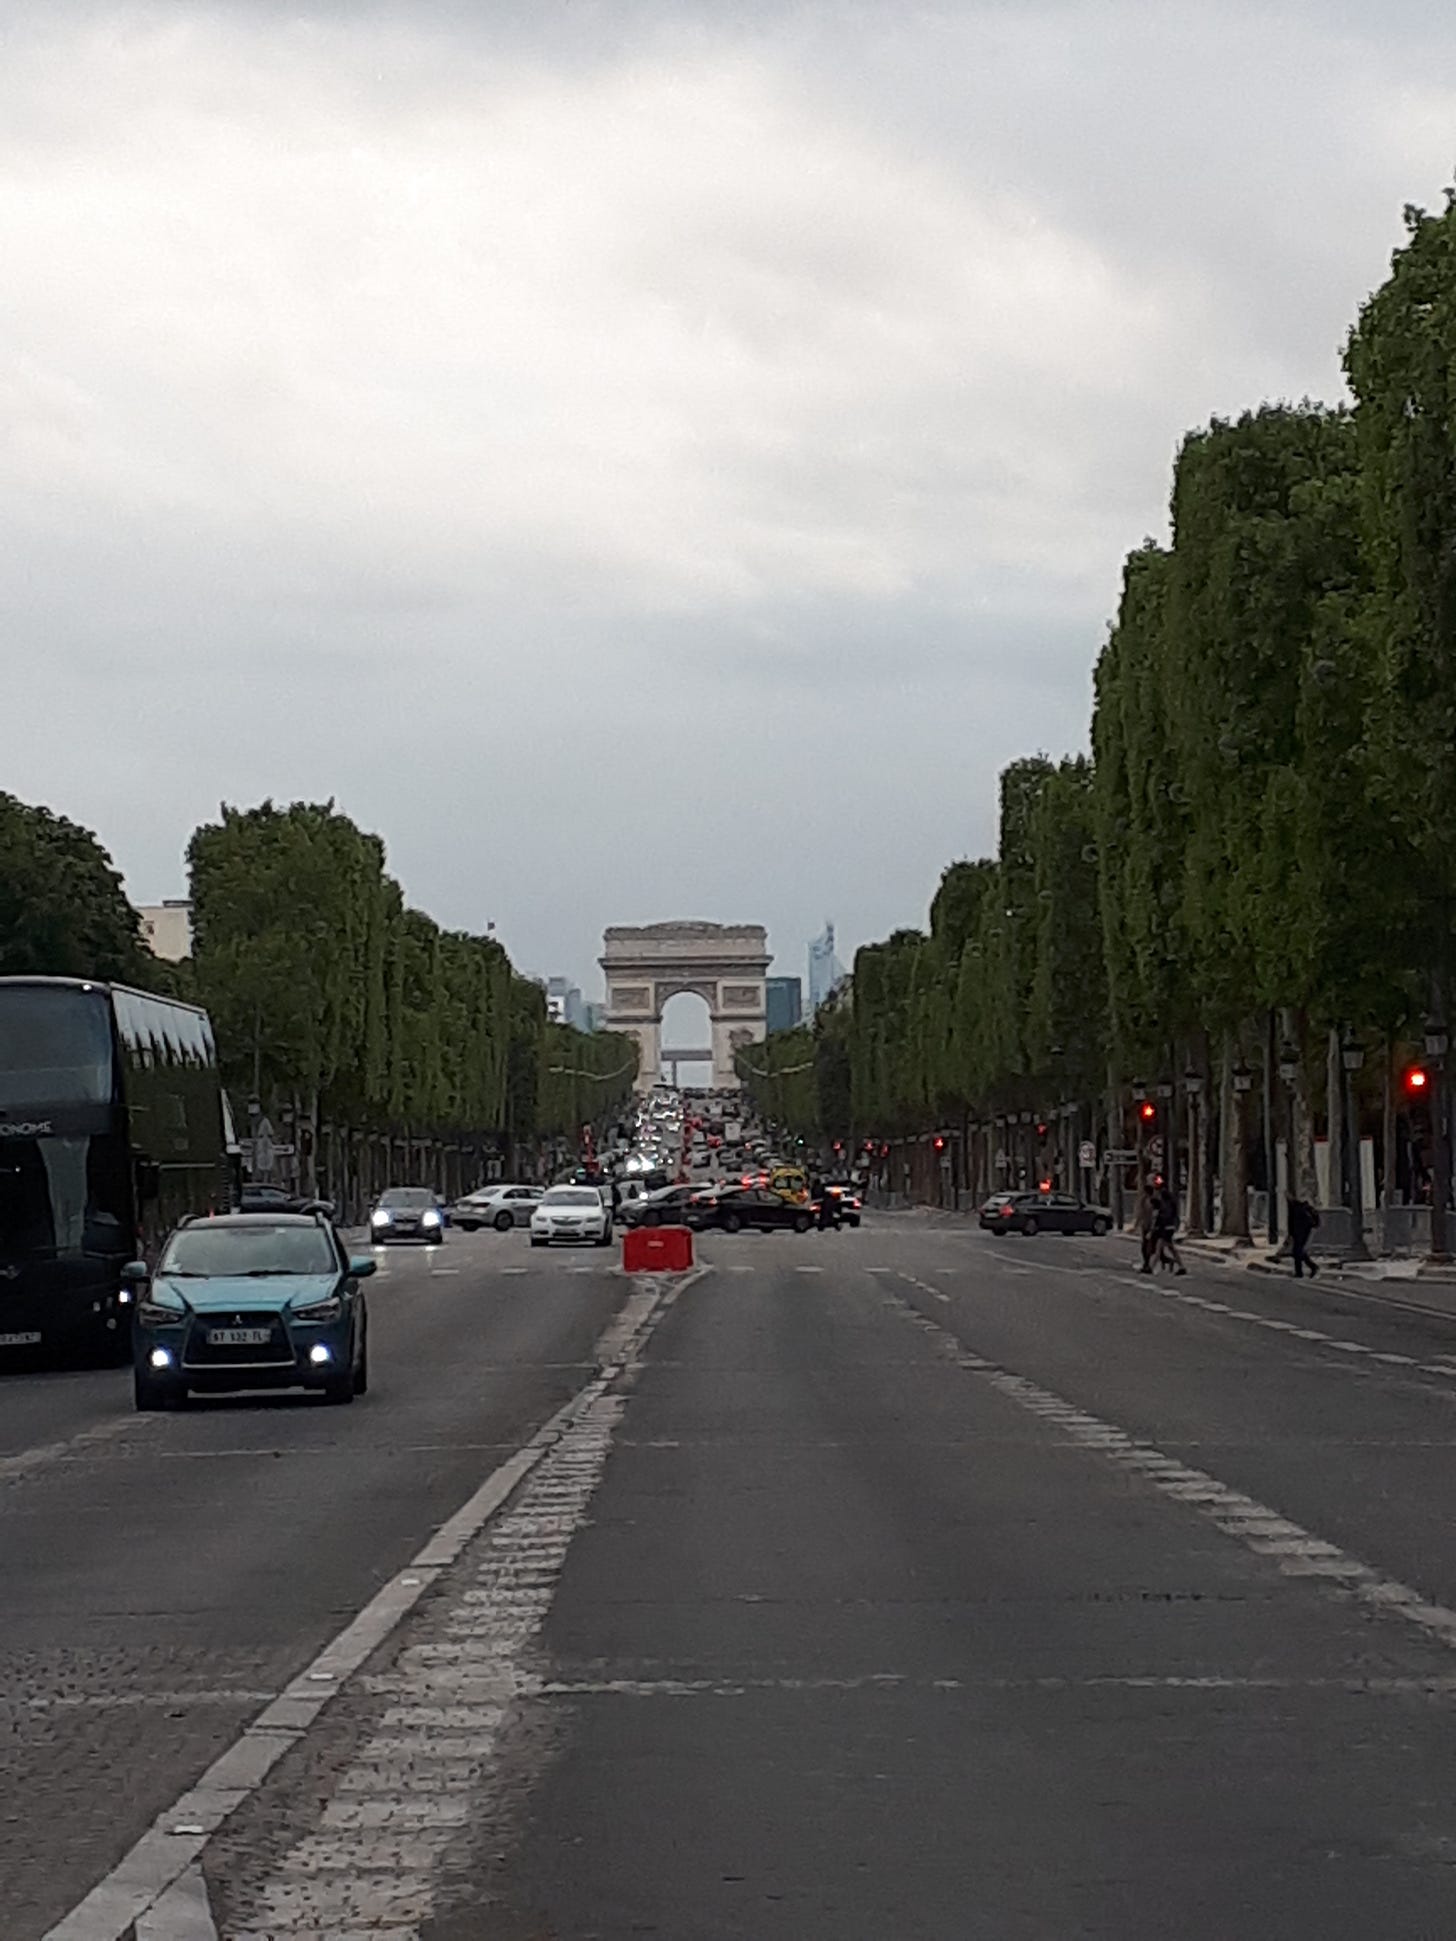 Champs d'Elysee with the Arc De Triomphe in the background.